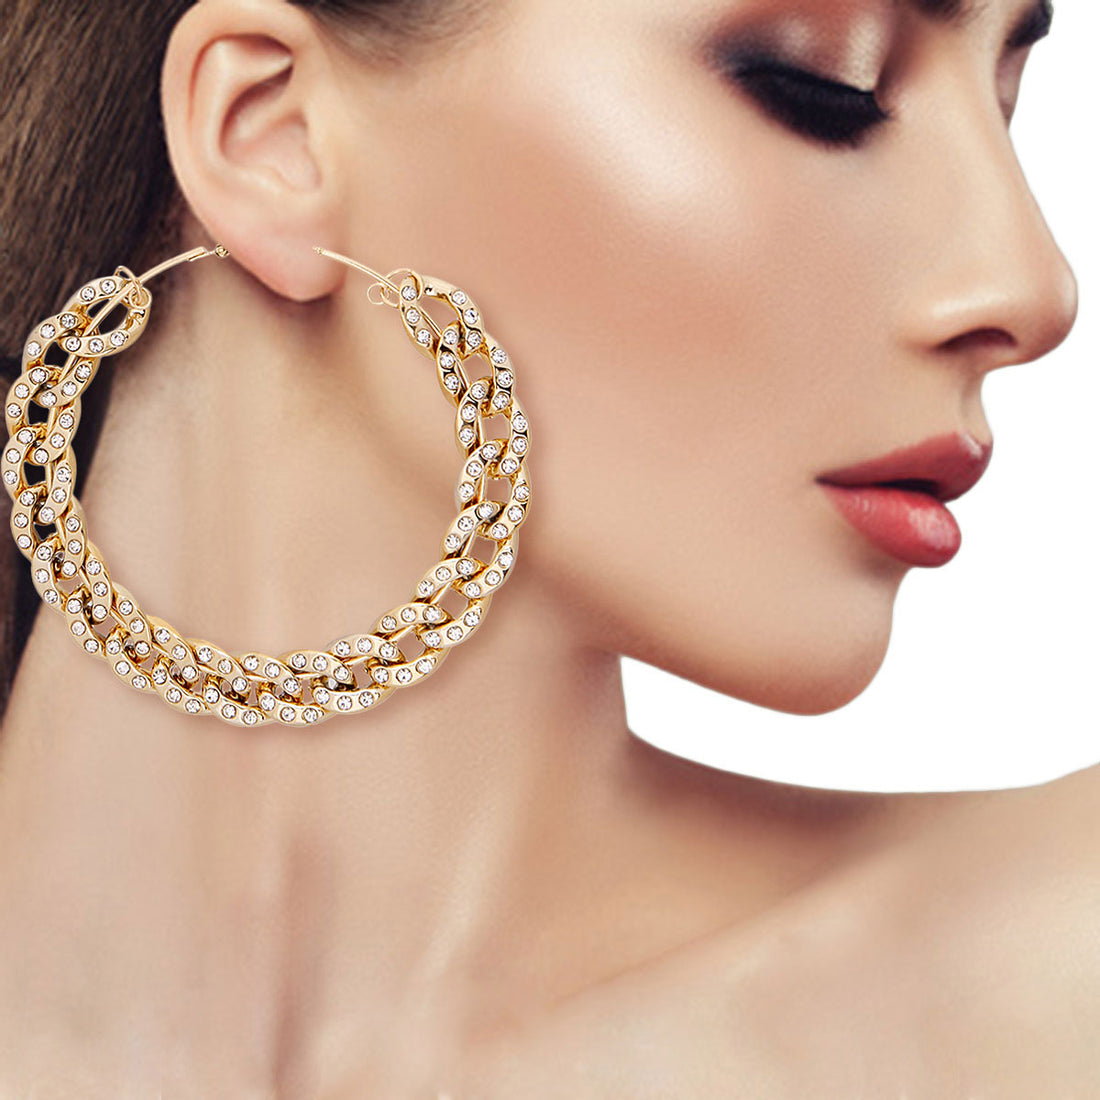 3 inch Gold Pave Stone Hoops